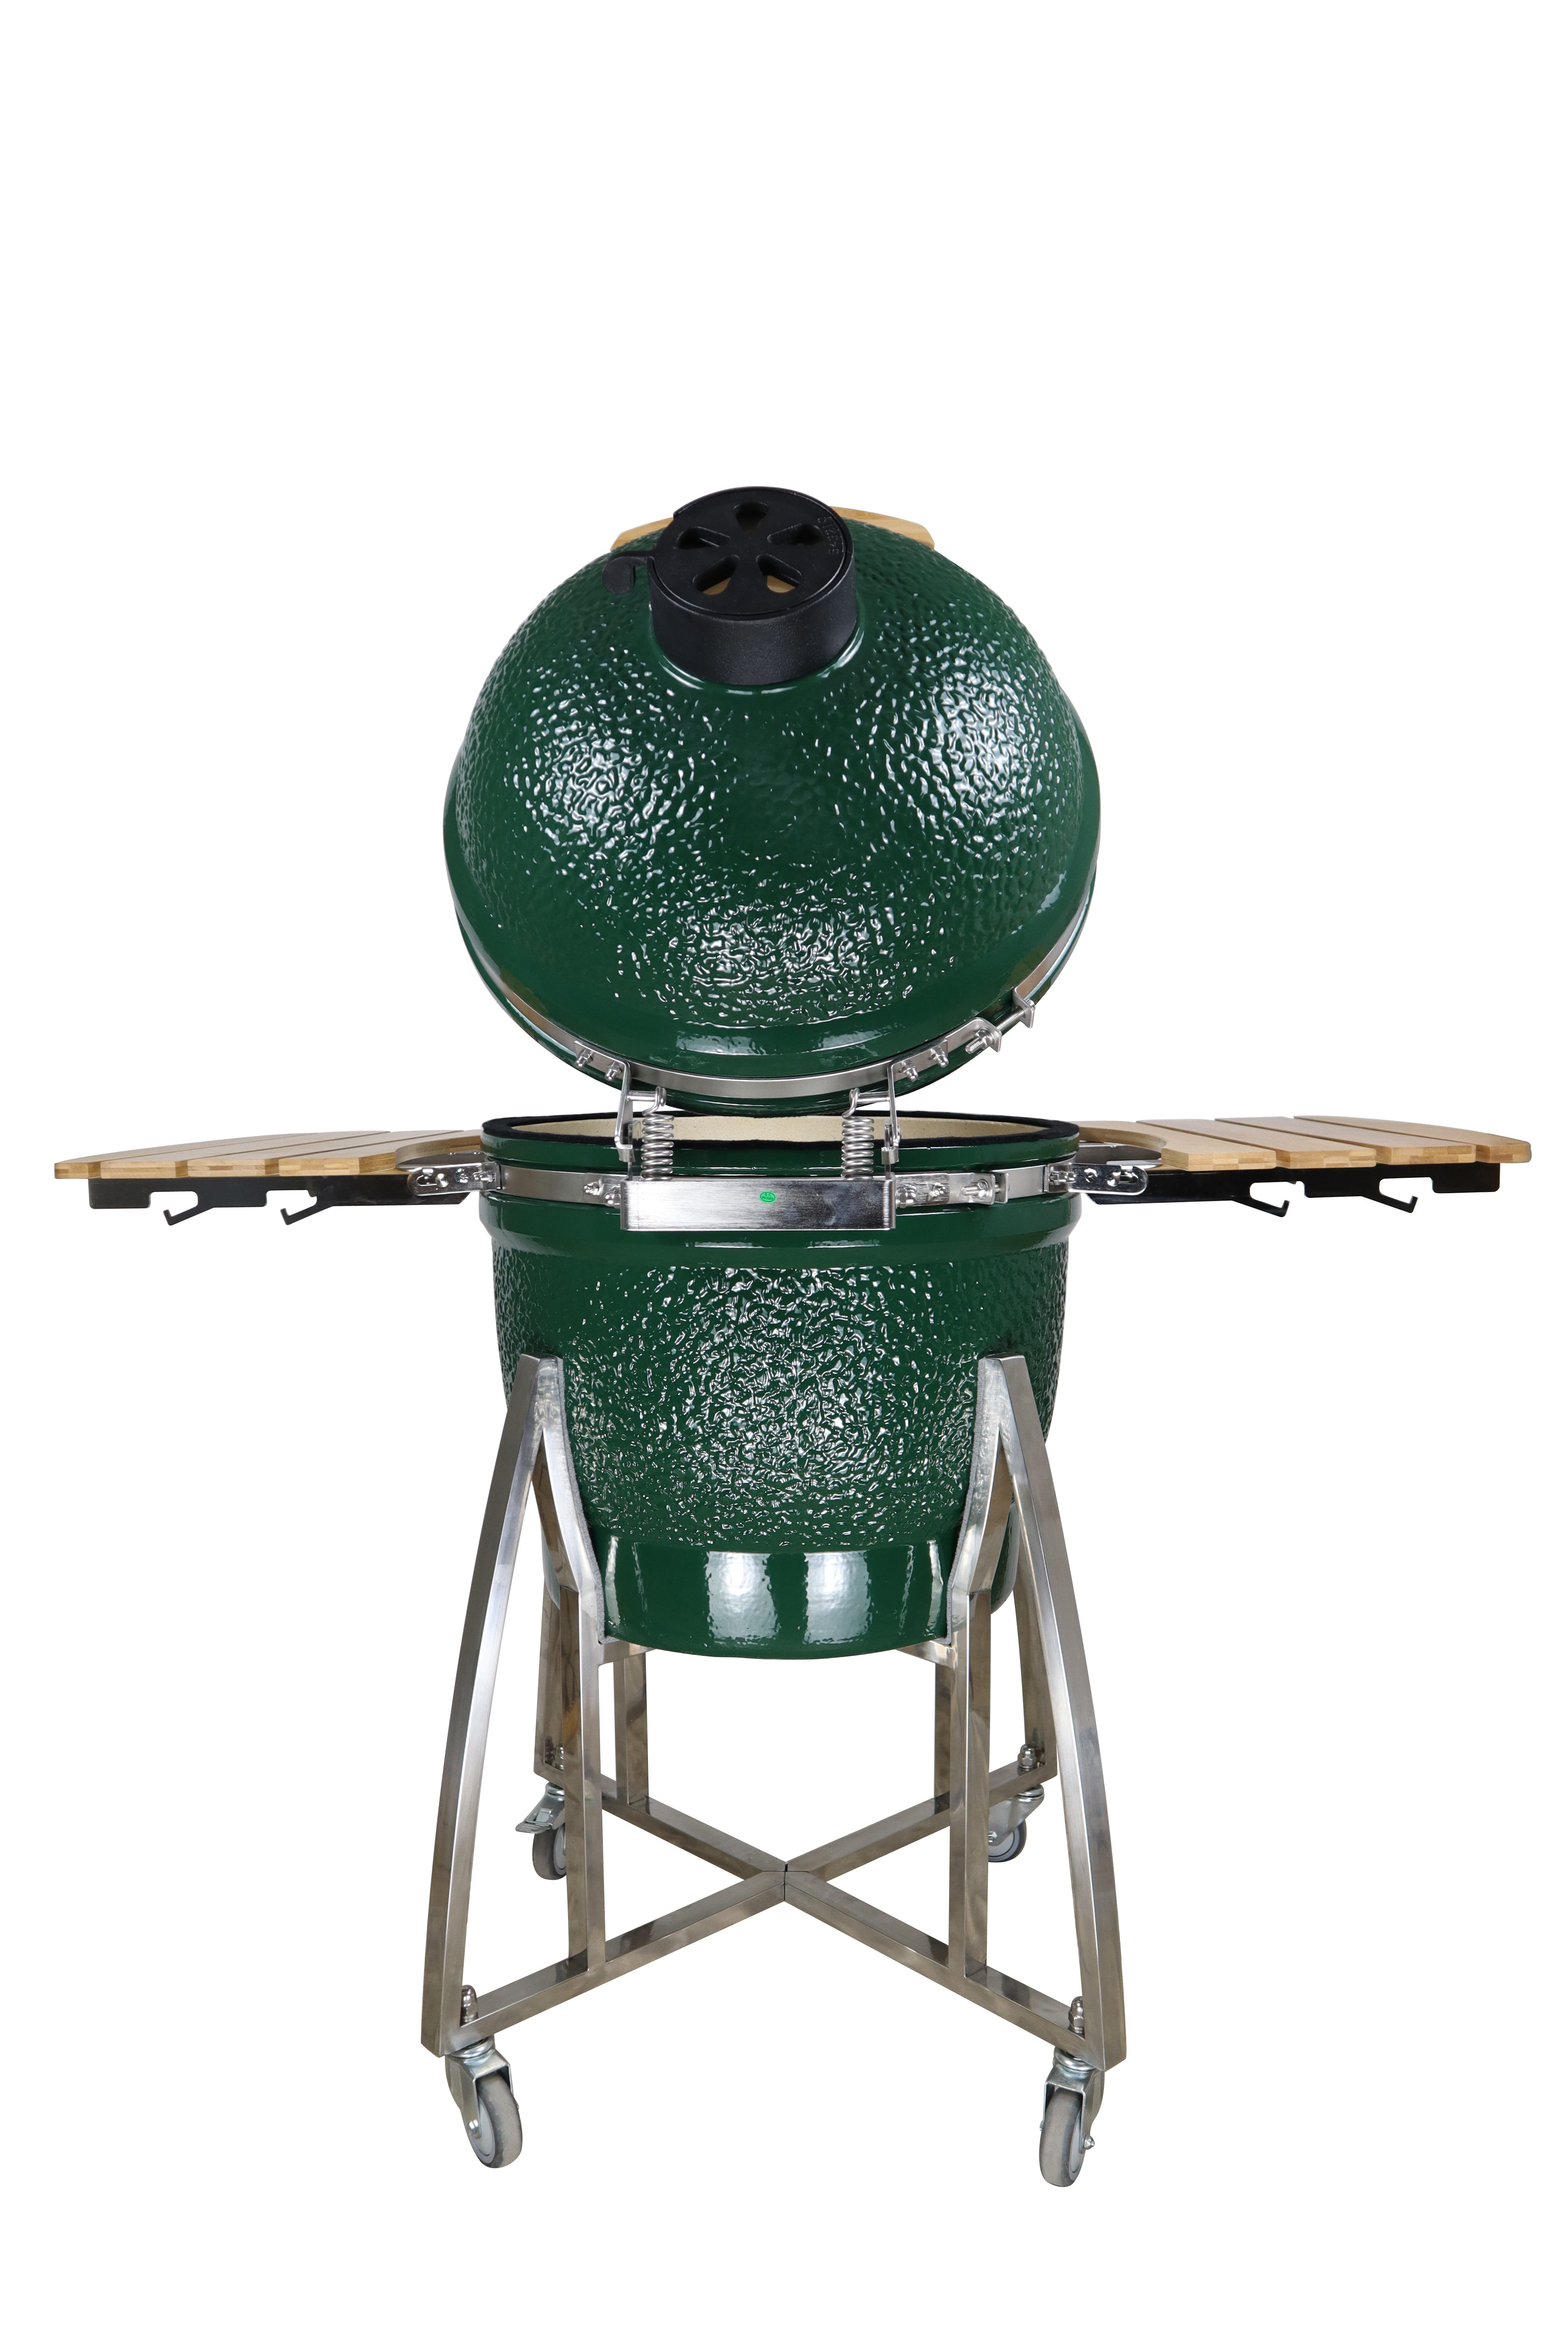 Auplex 21” L Size Ceramic Kamado Grill for Outdoor BBQ Featured Image